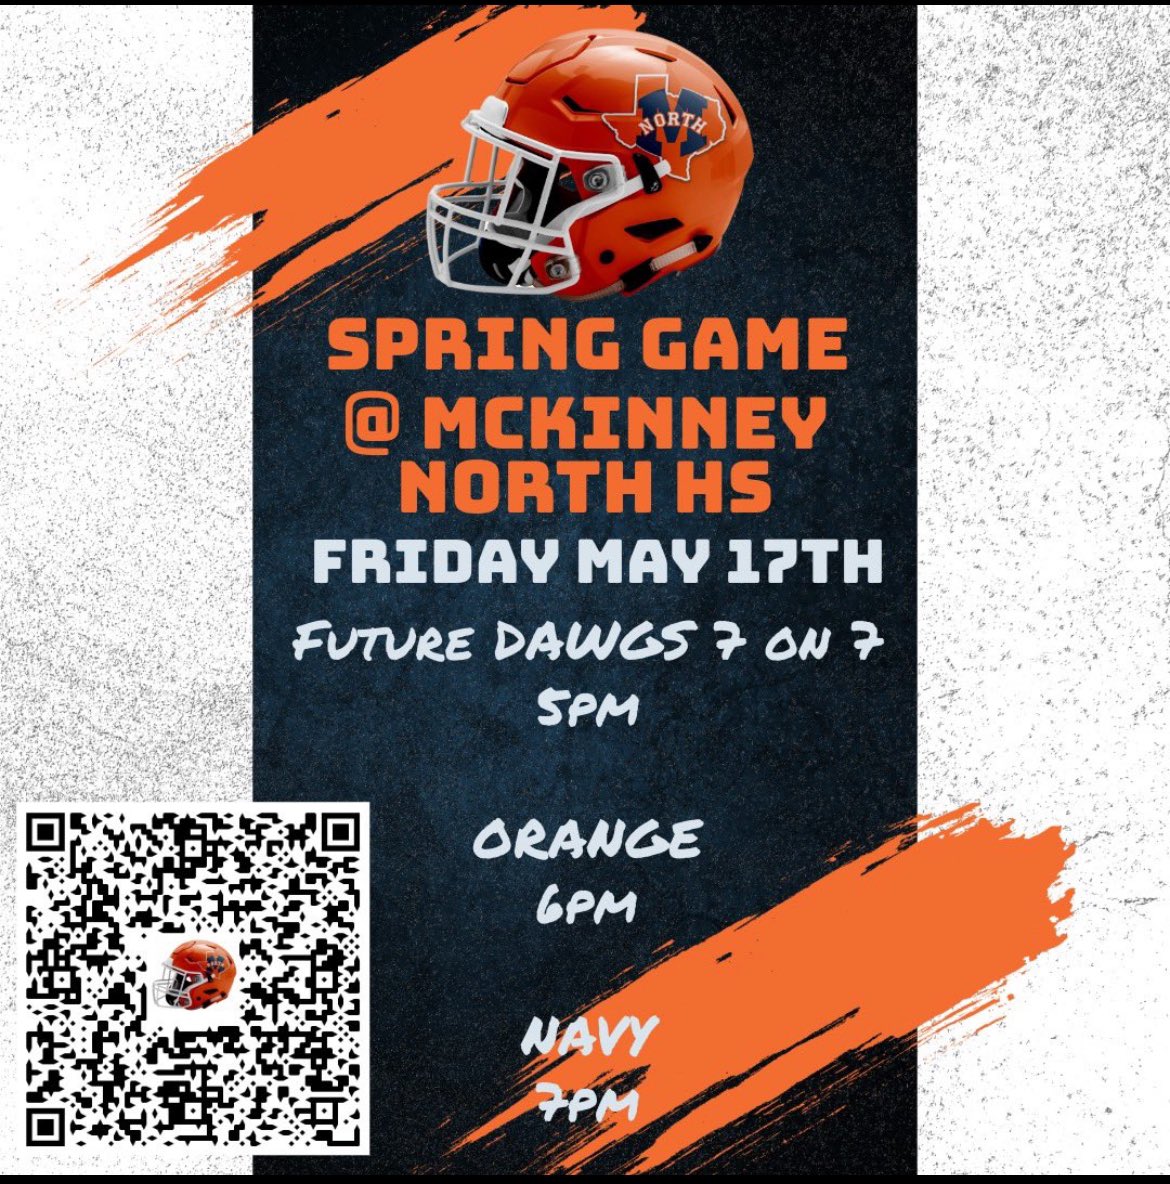 Tonights the night! Wear your orange and put your dawgs up!!